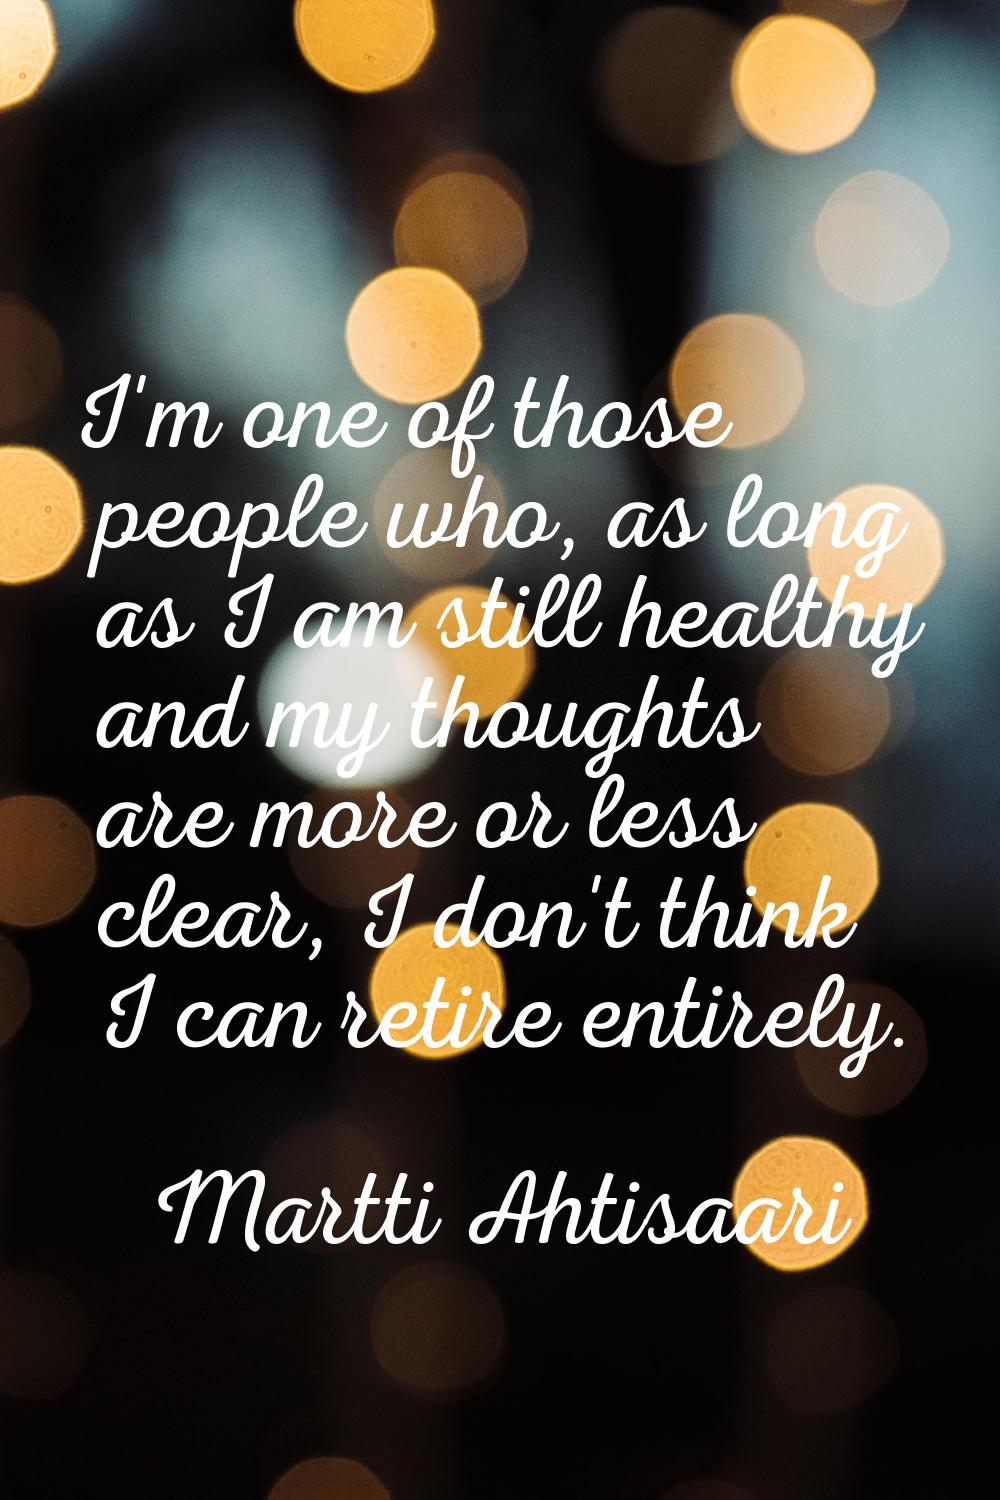 I'm one of those people who, as long as I am still healthy and my thoughts are more or less clear, 